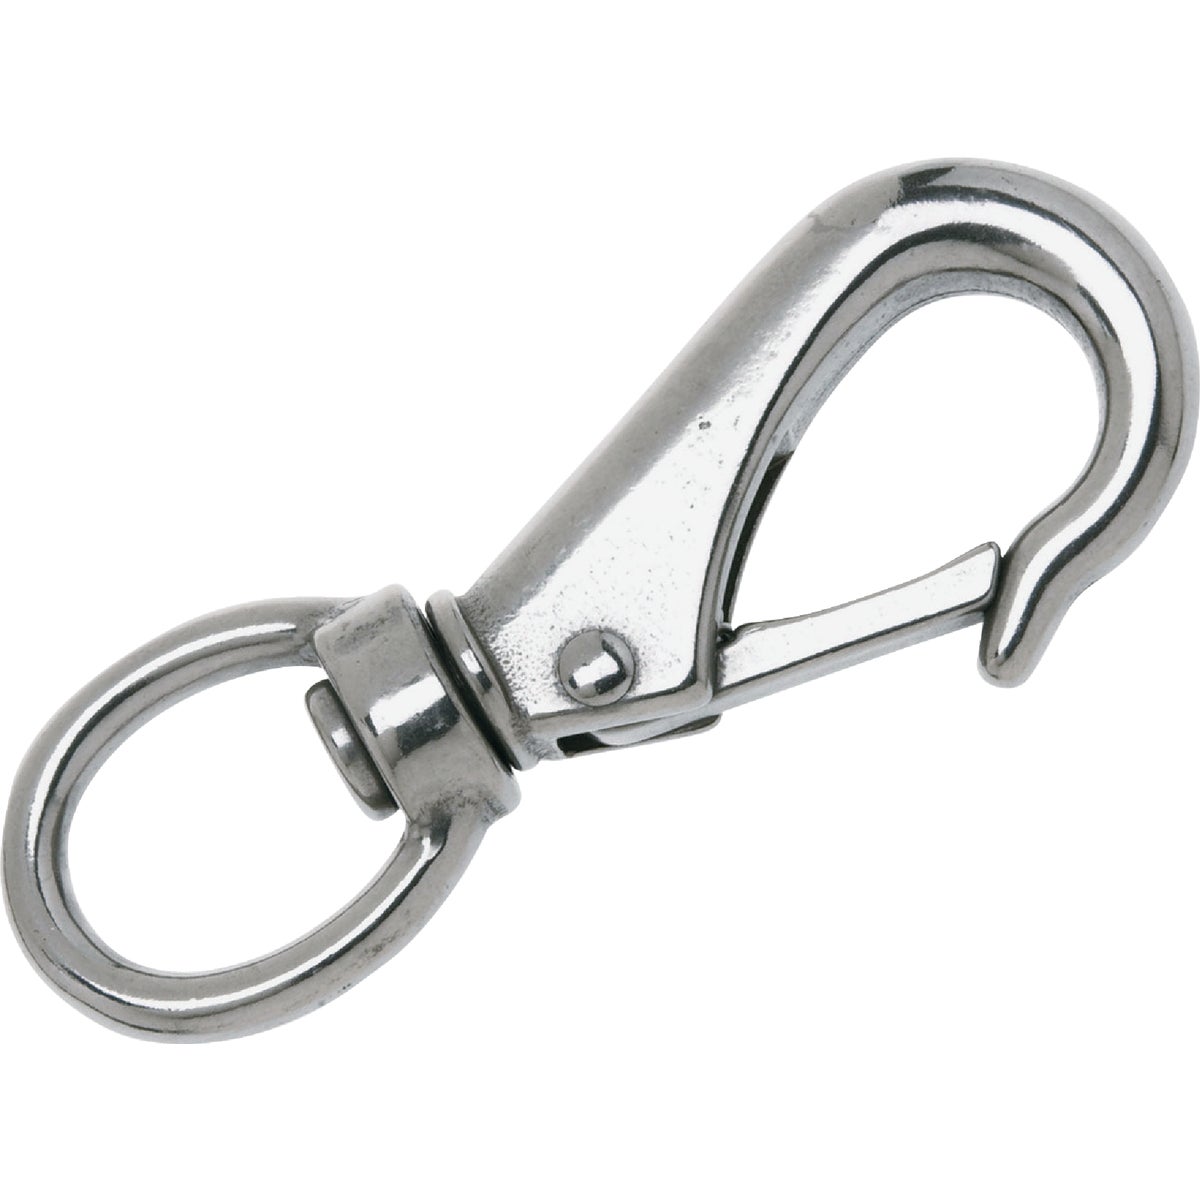 Item 769709, Round eye quick snap. Features a convenient swivel end.